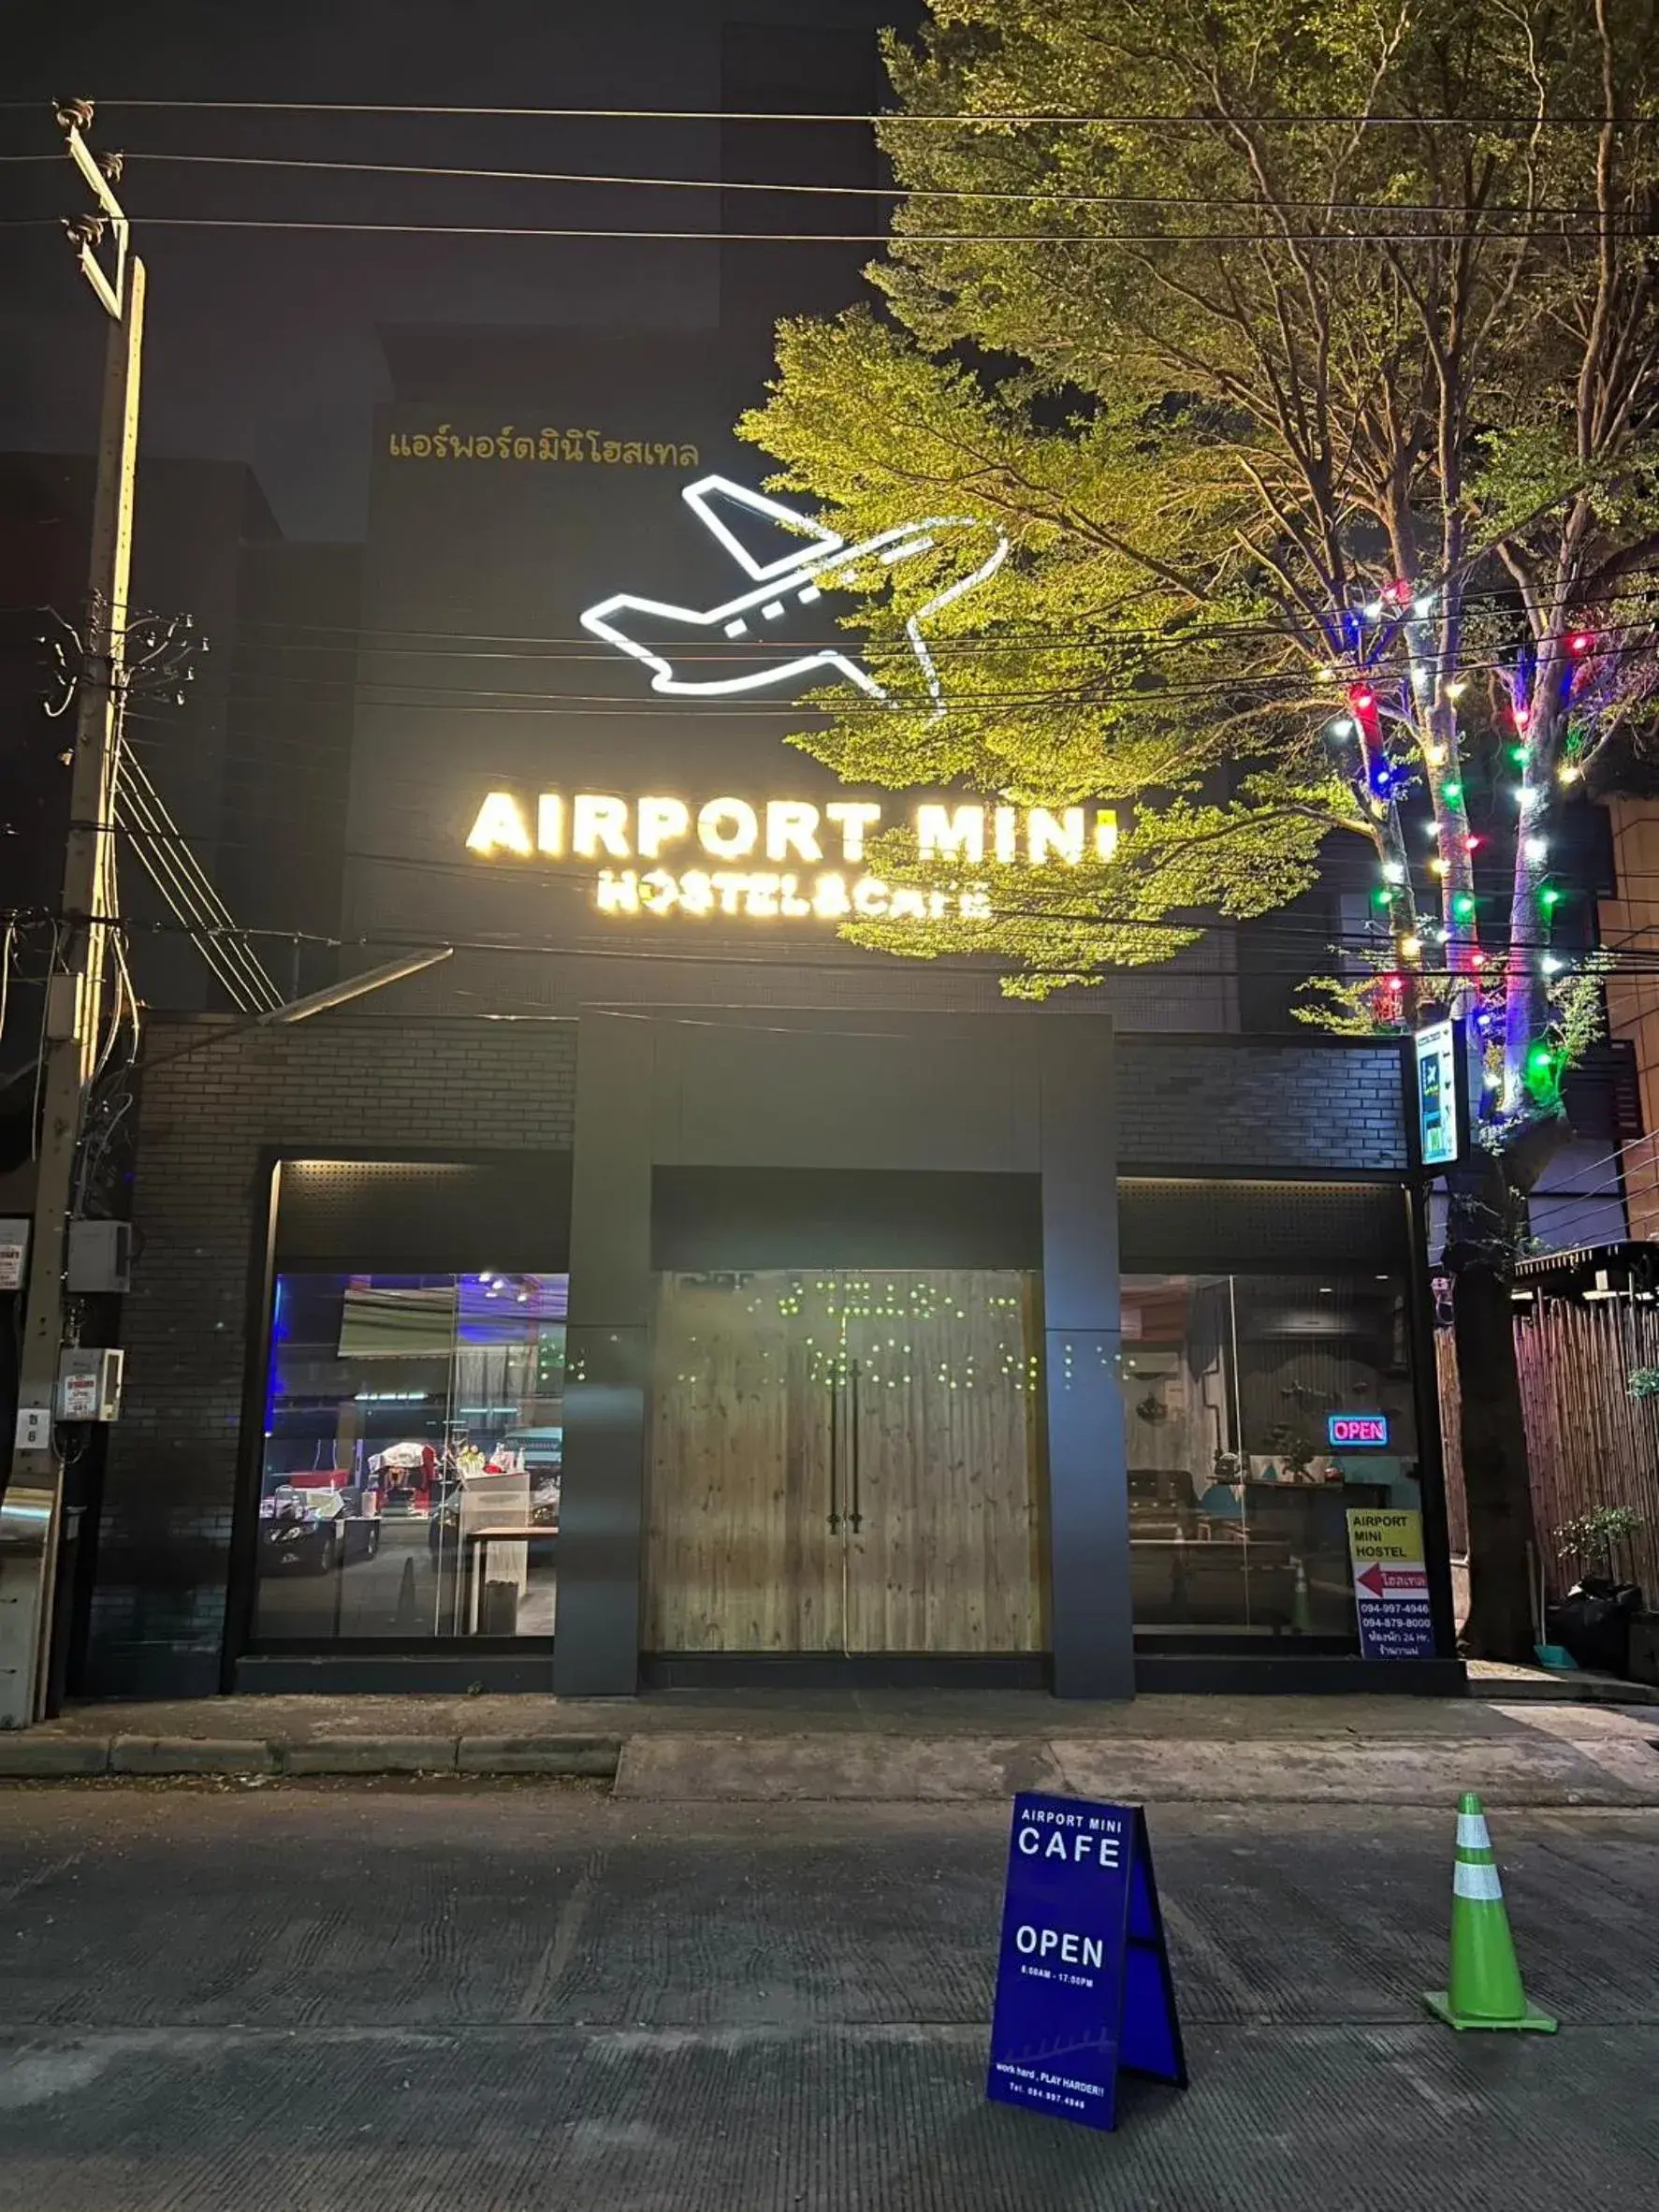 Property building in Airport Mini Hostel at Don Muang Airport